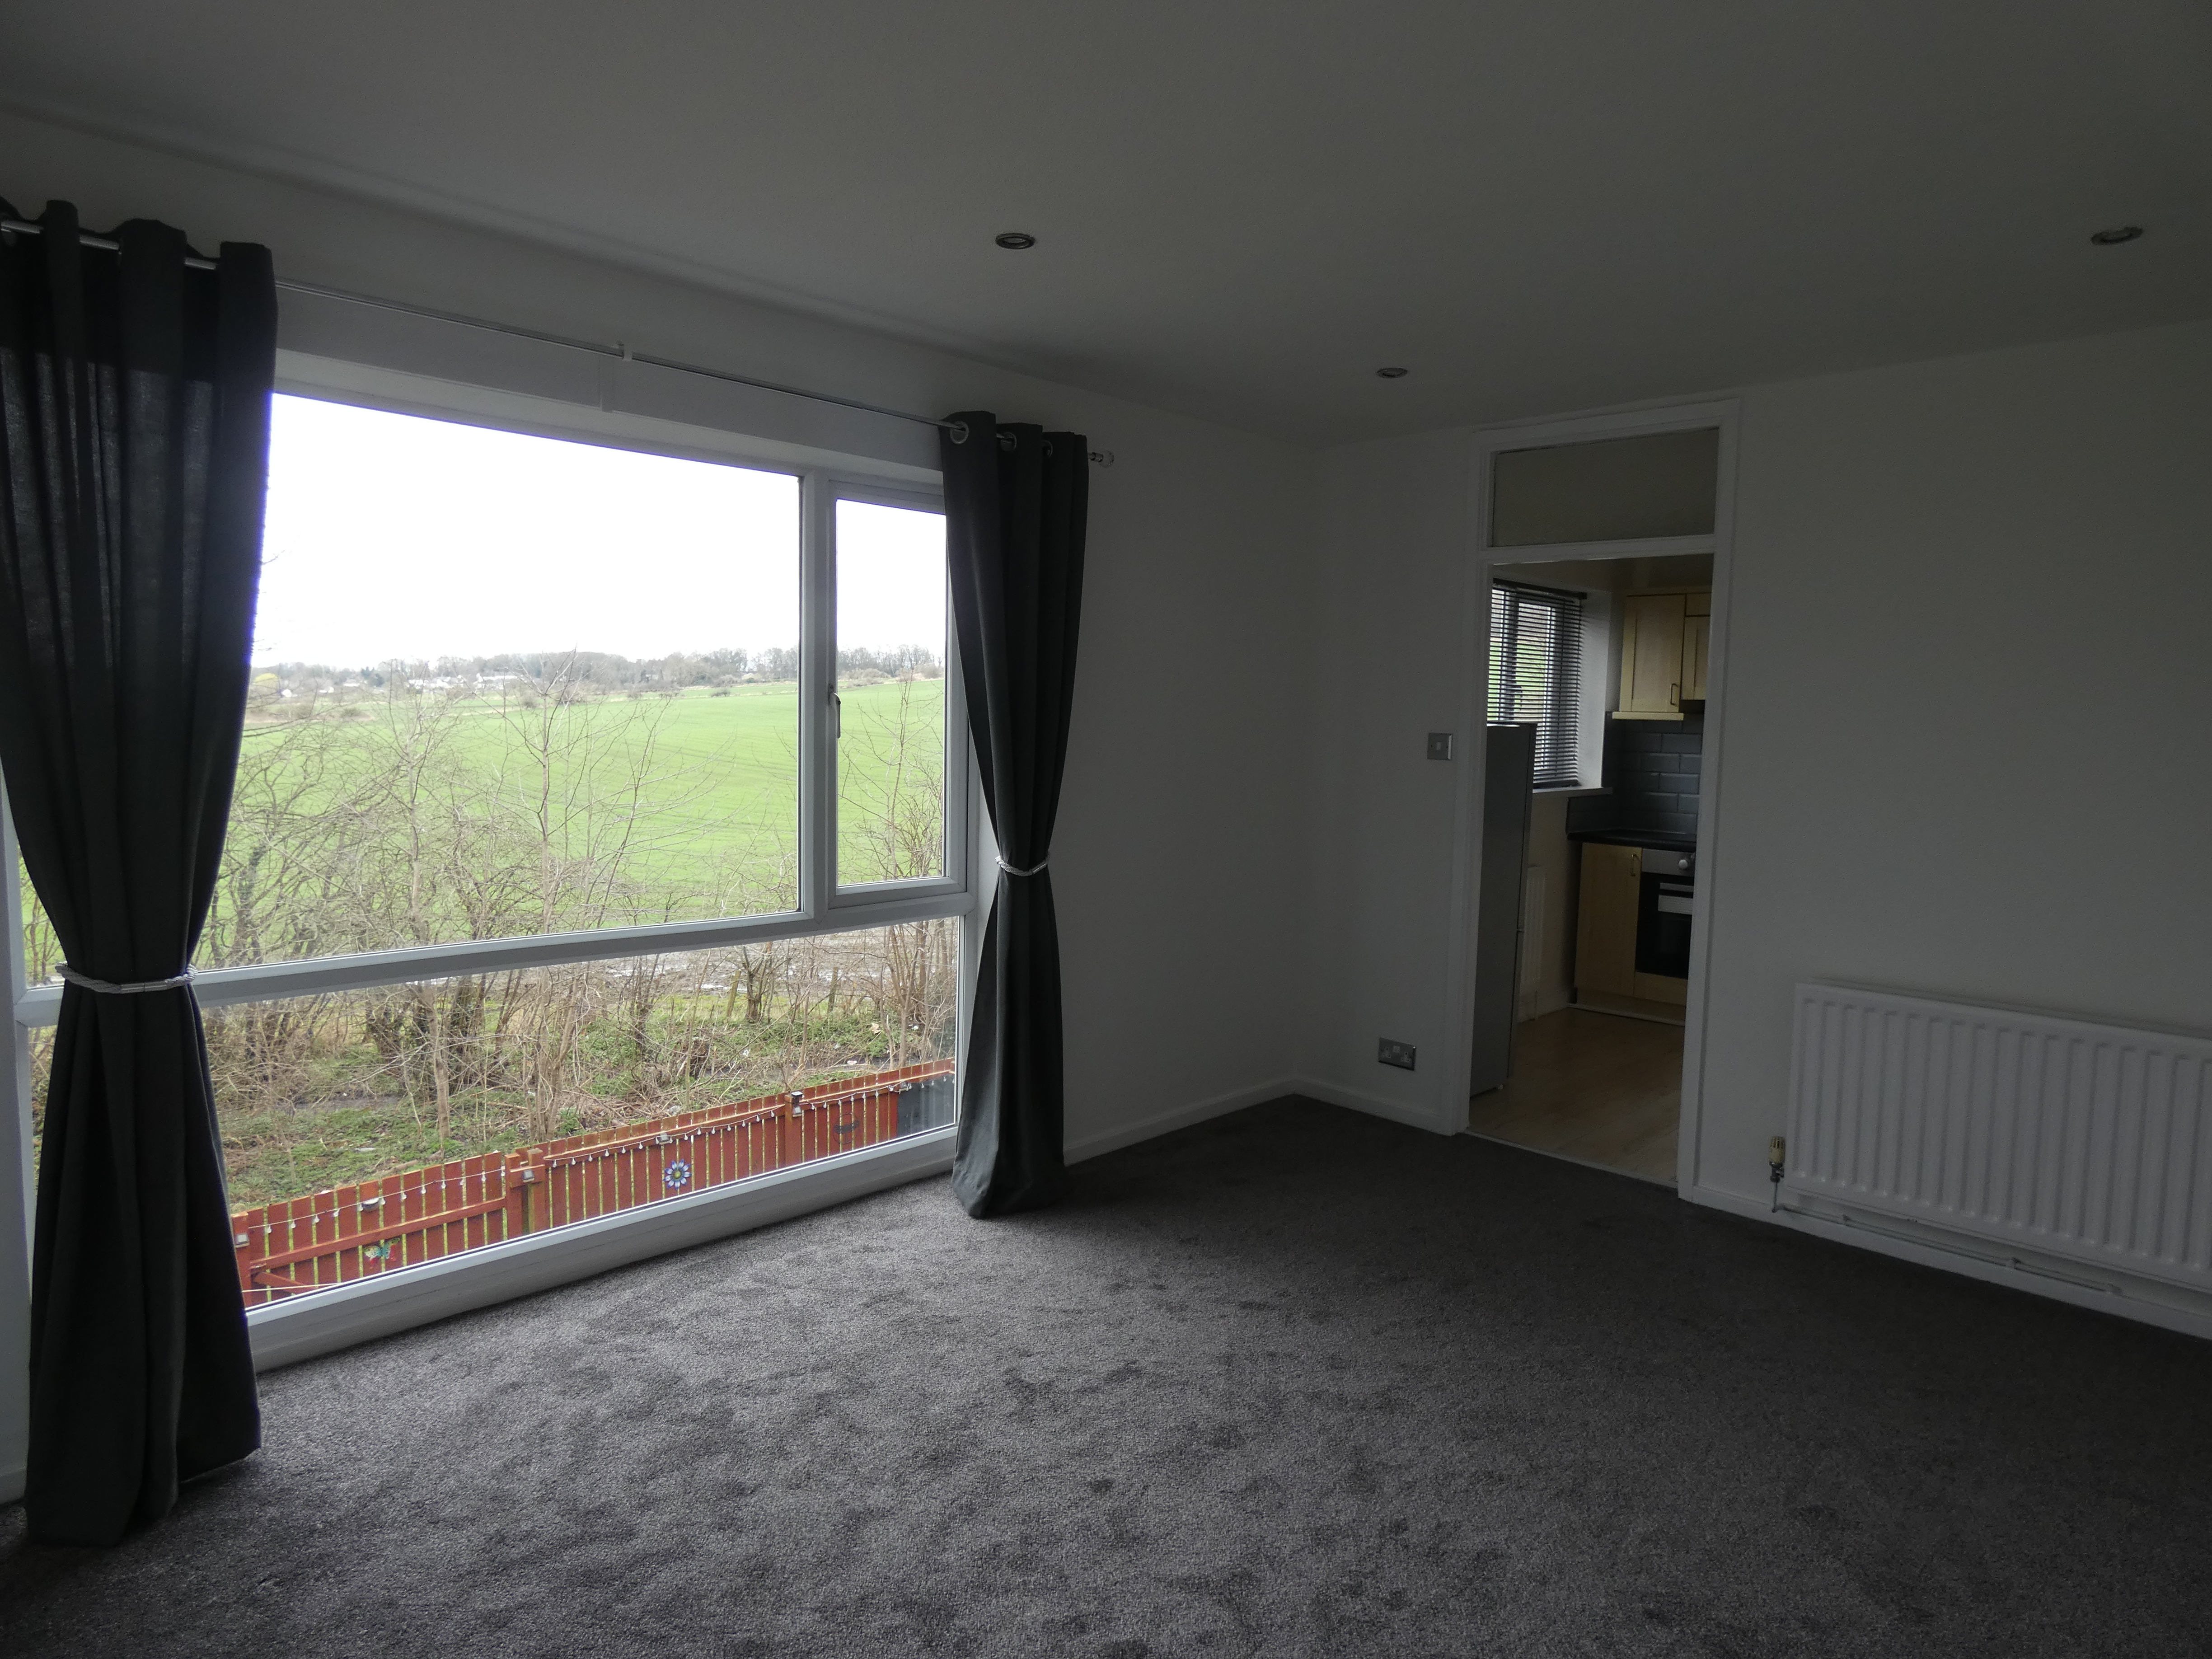 2 bed flat to rent in Wooler Green, Newcastle upon tyne - Property Image 1